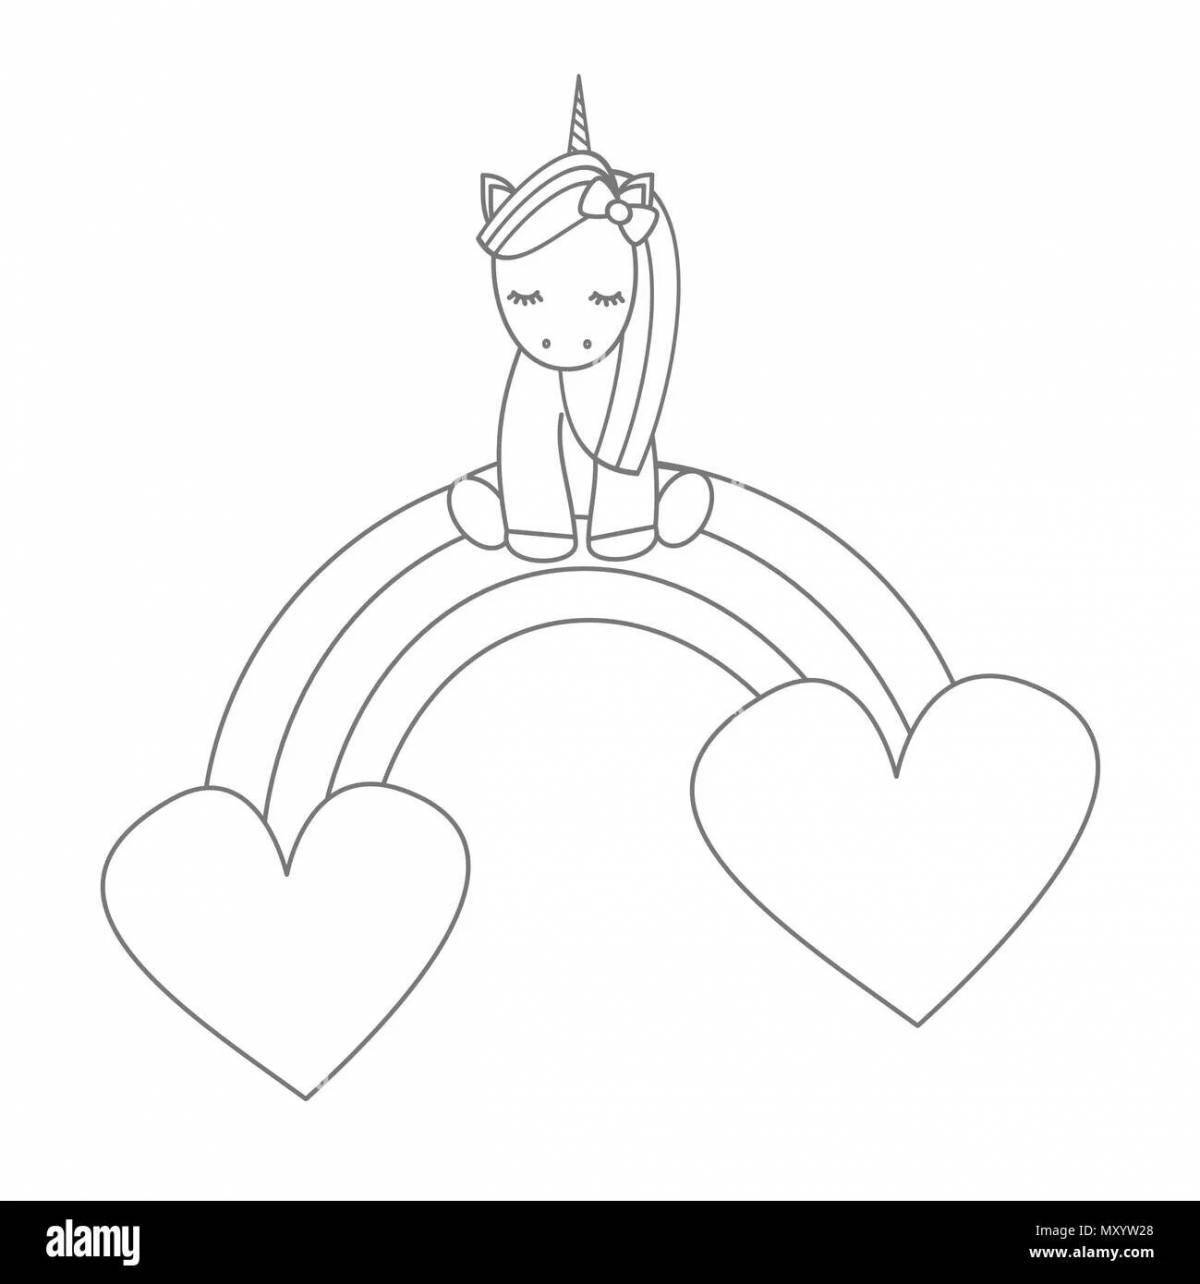 Gorgeous Rainbow Heart Coloring Page